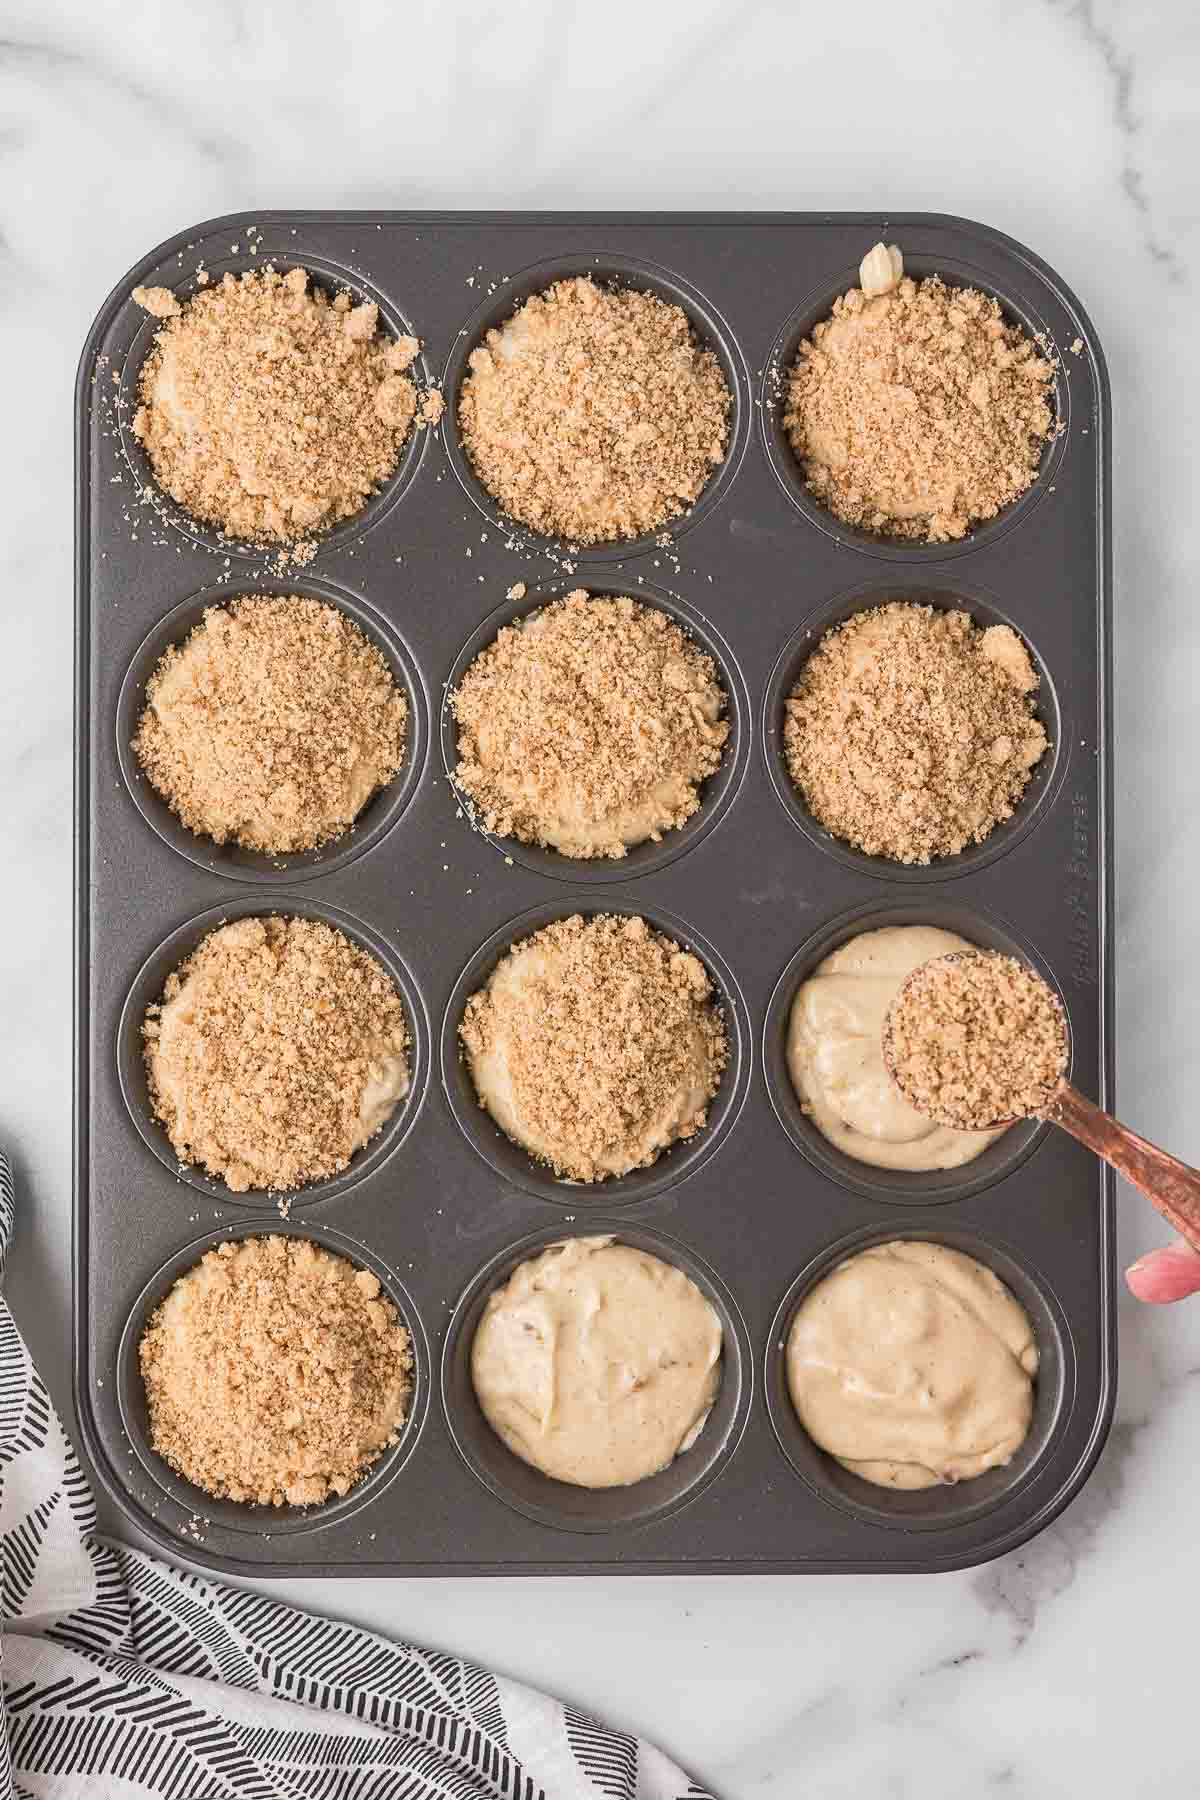 Muffin batter in a muffin pan with the crumb topping being added.